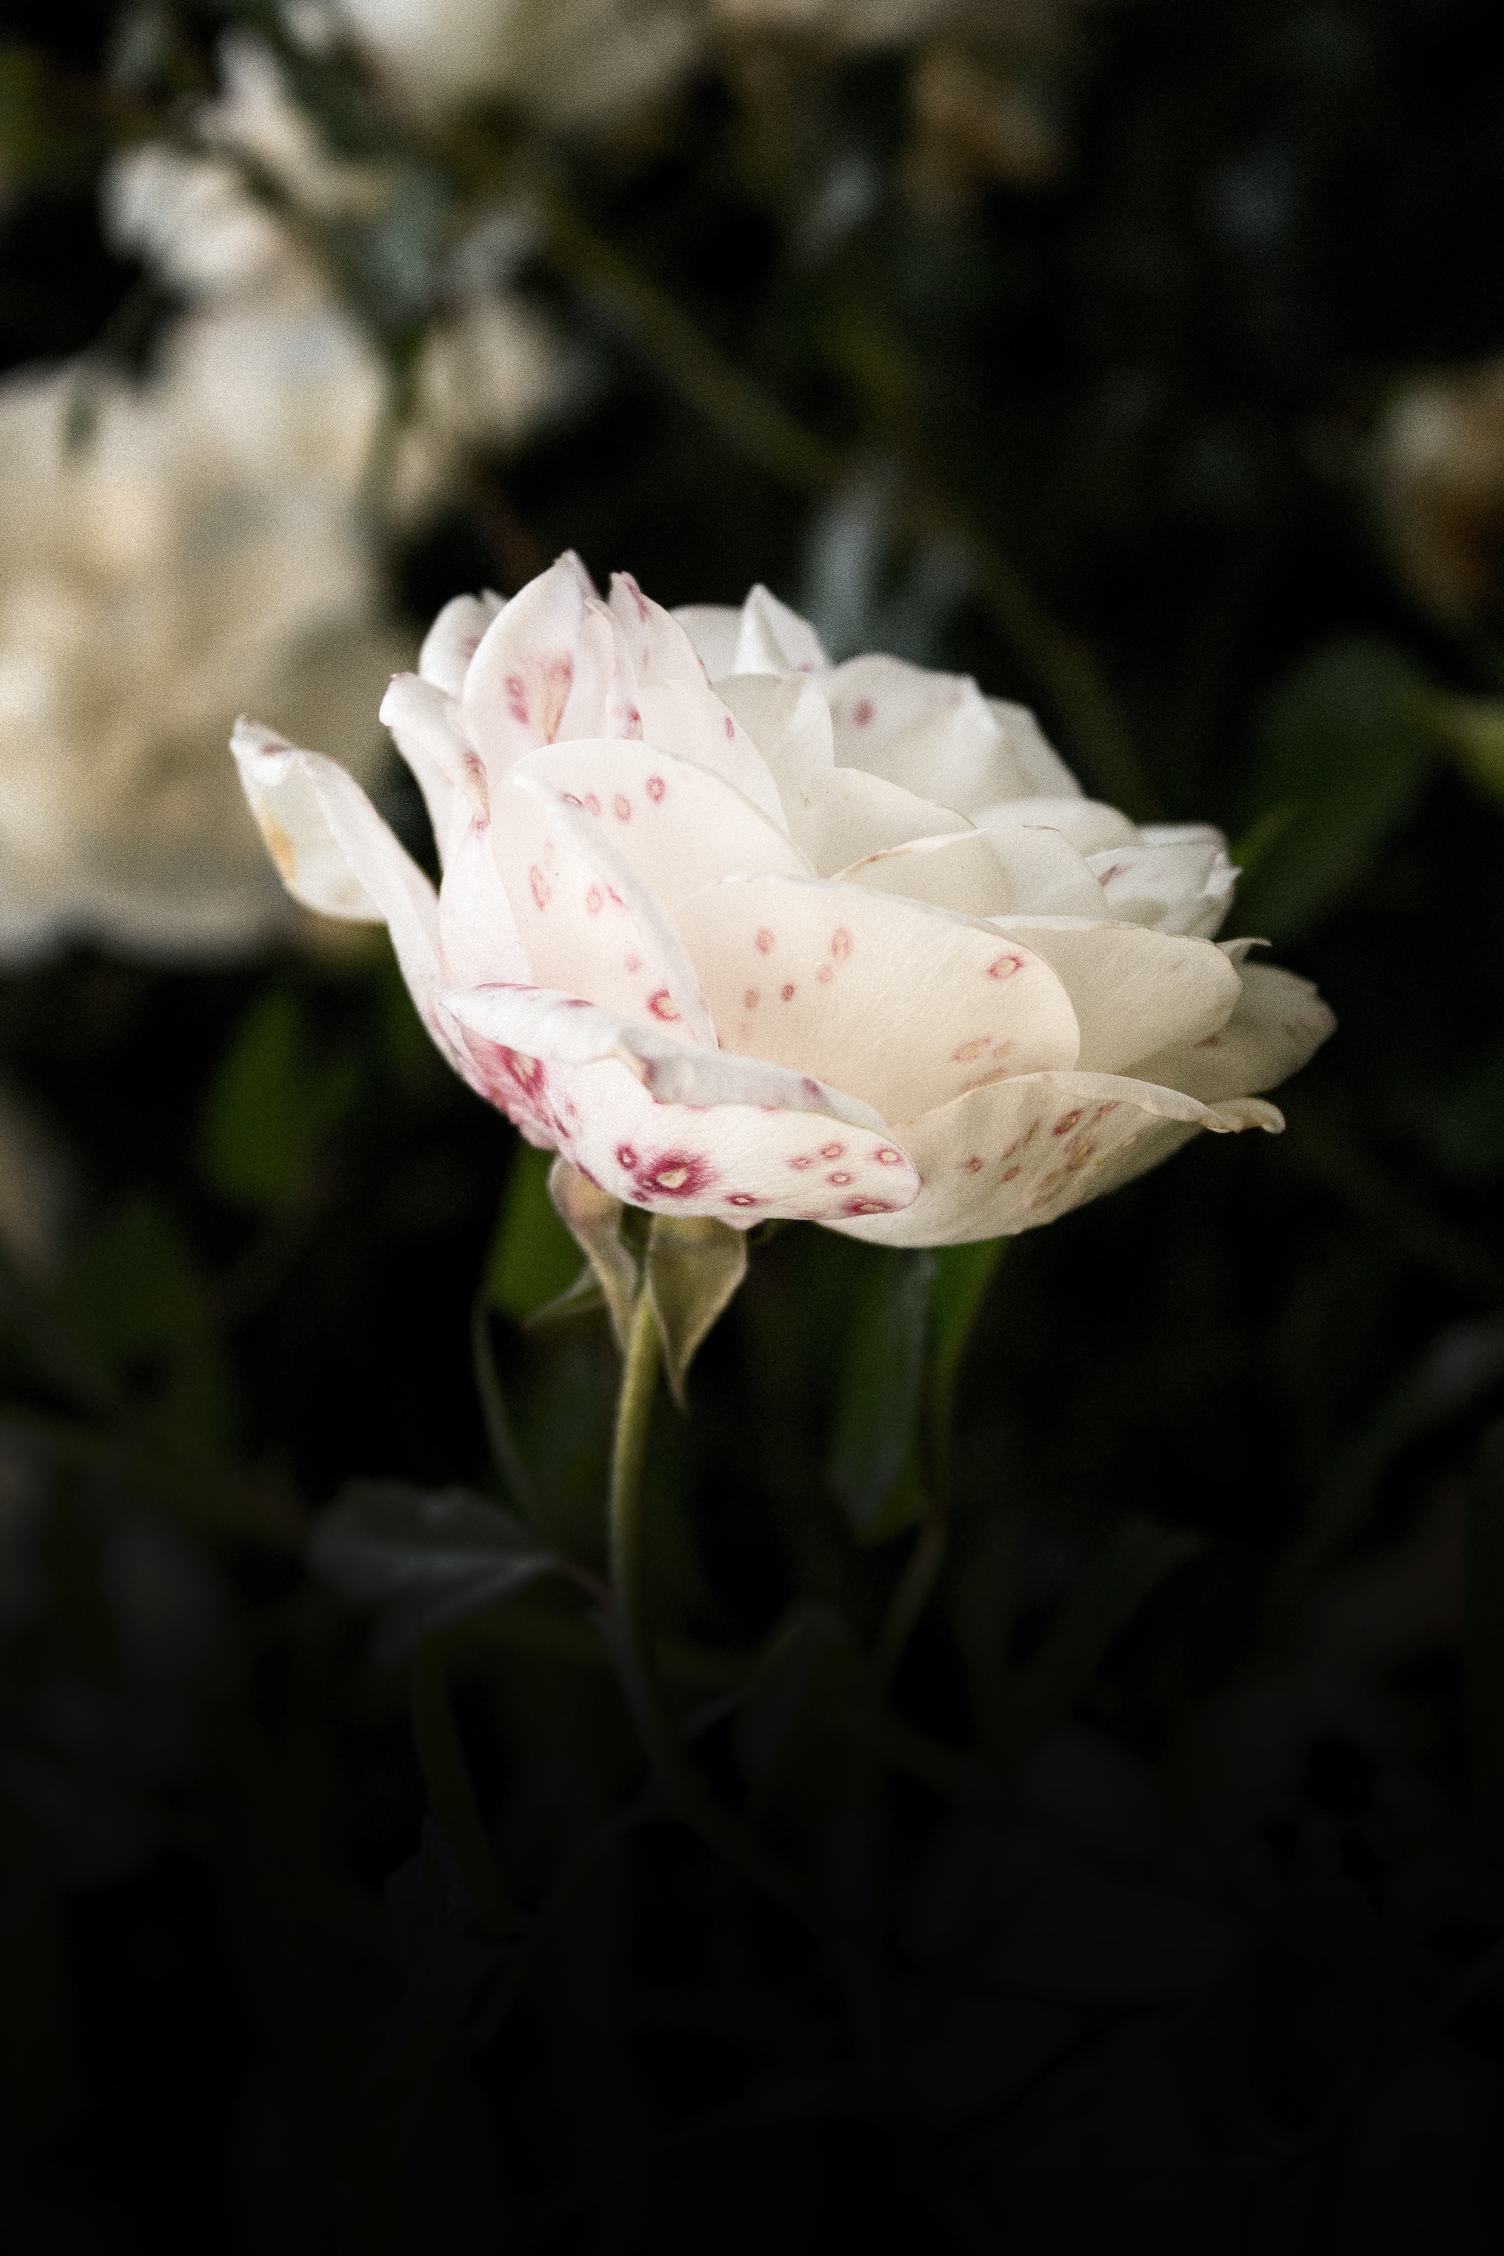 Single White Rose with Pink Spots